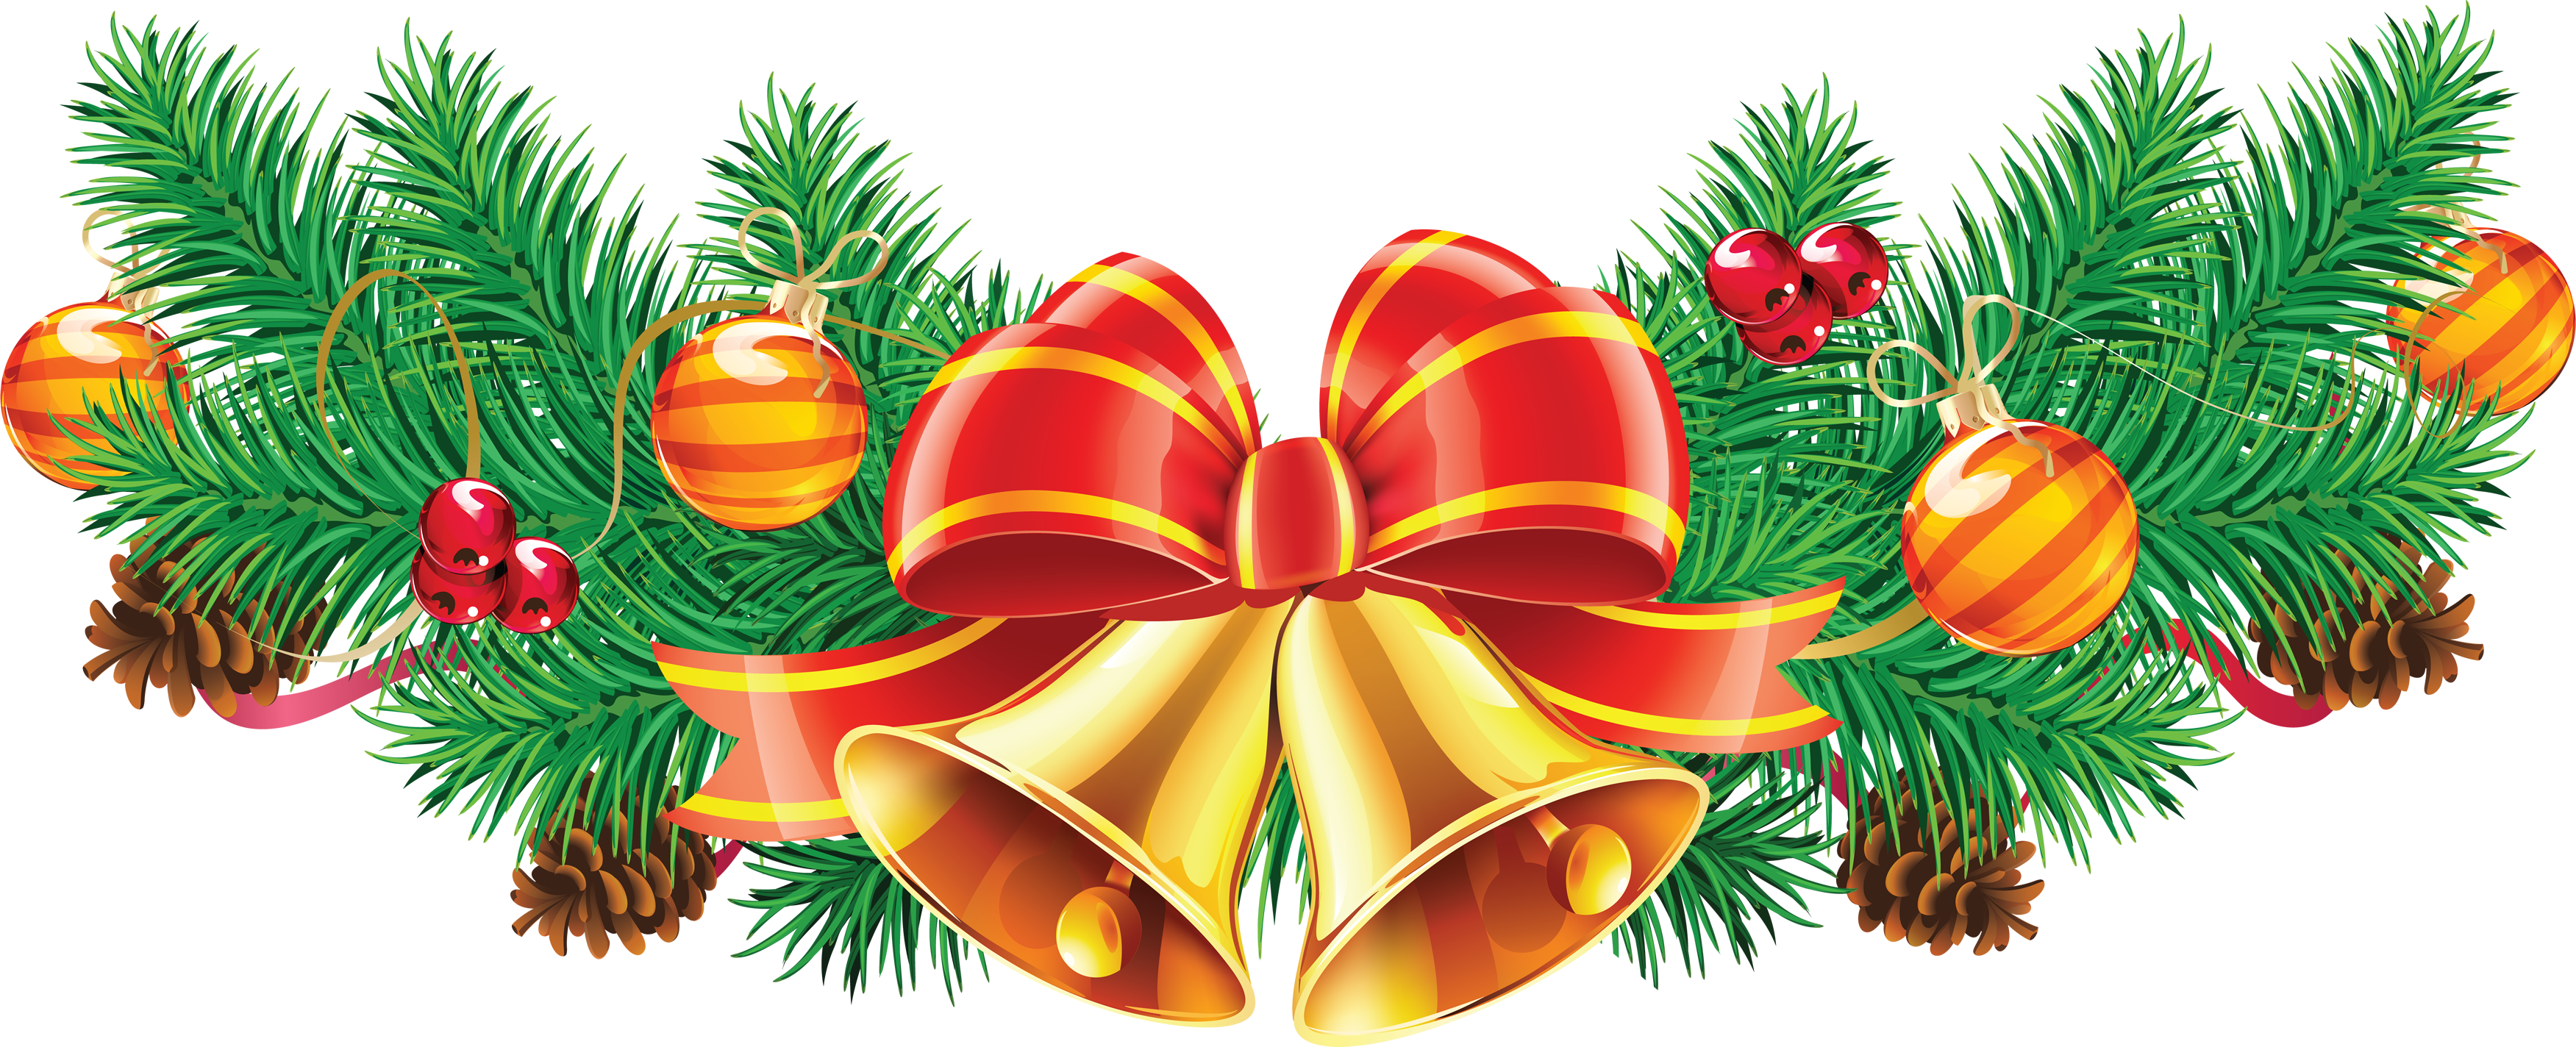 HQ Christmas PNG Transparent Christmas.PNG Images. | PlusPNG